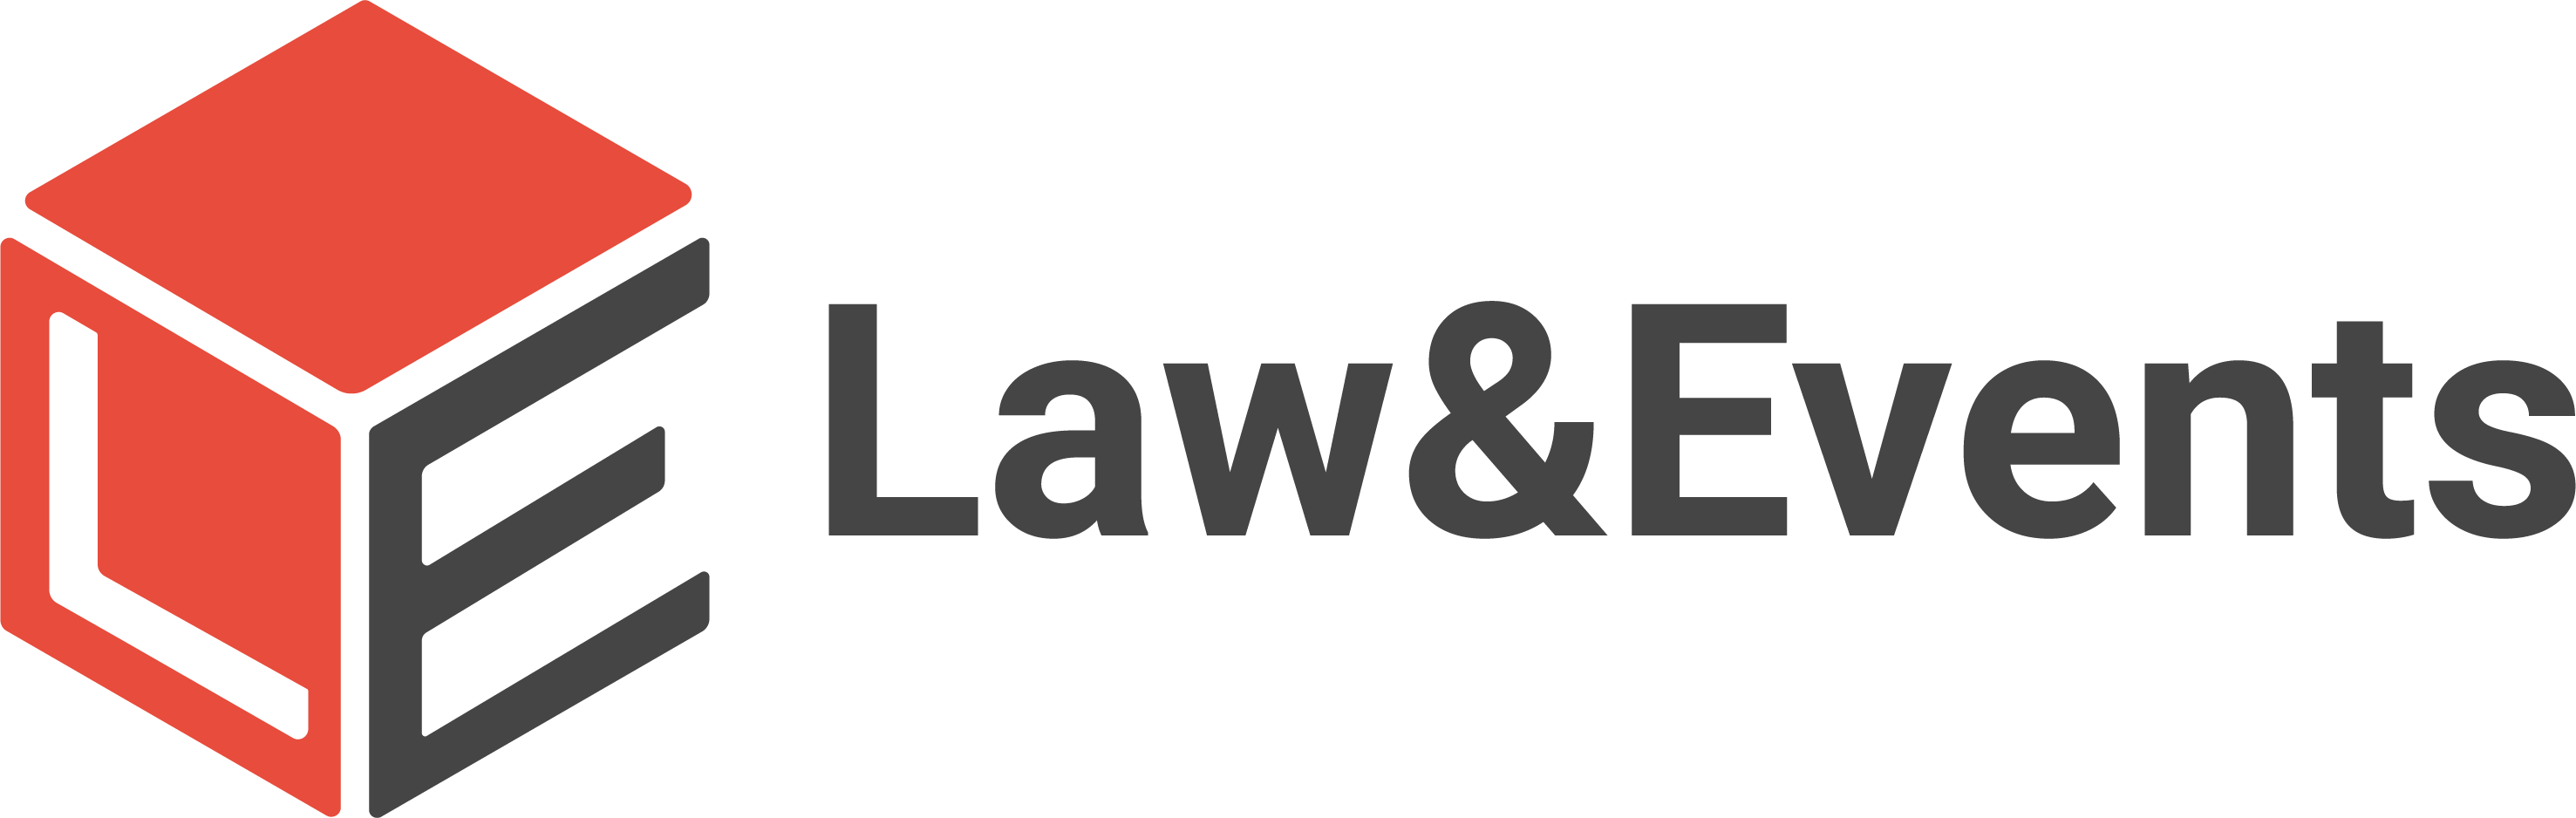 Law & Events